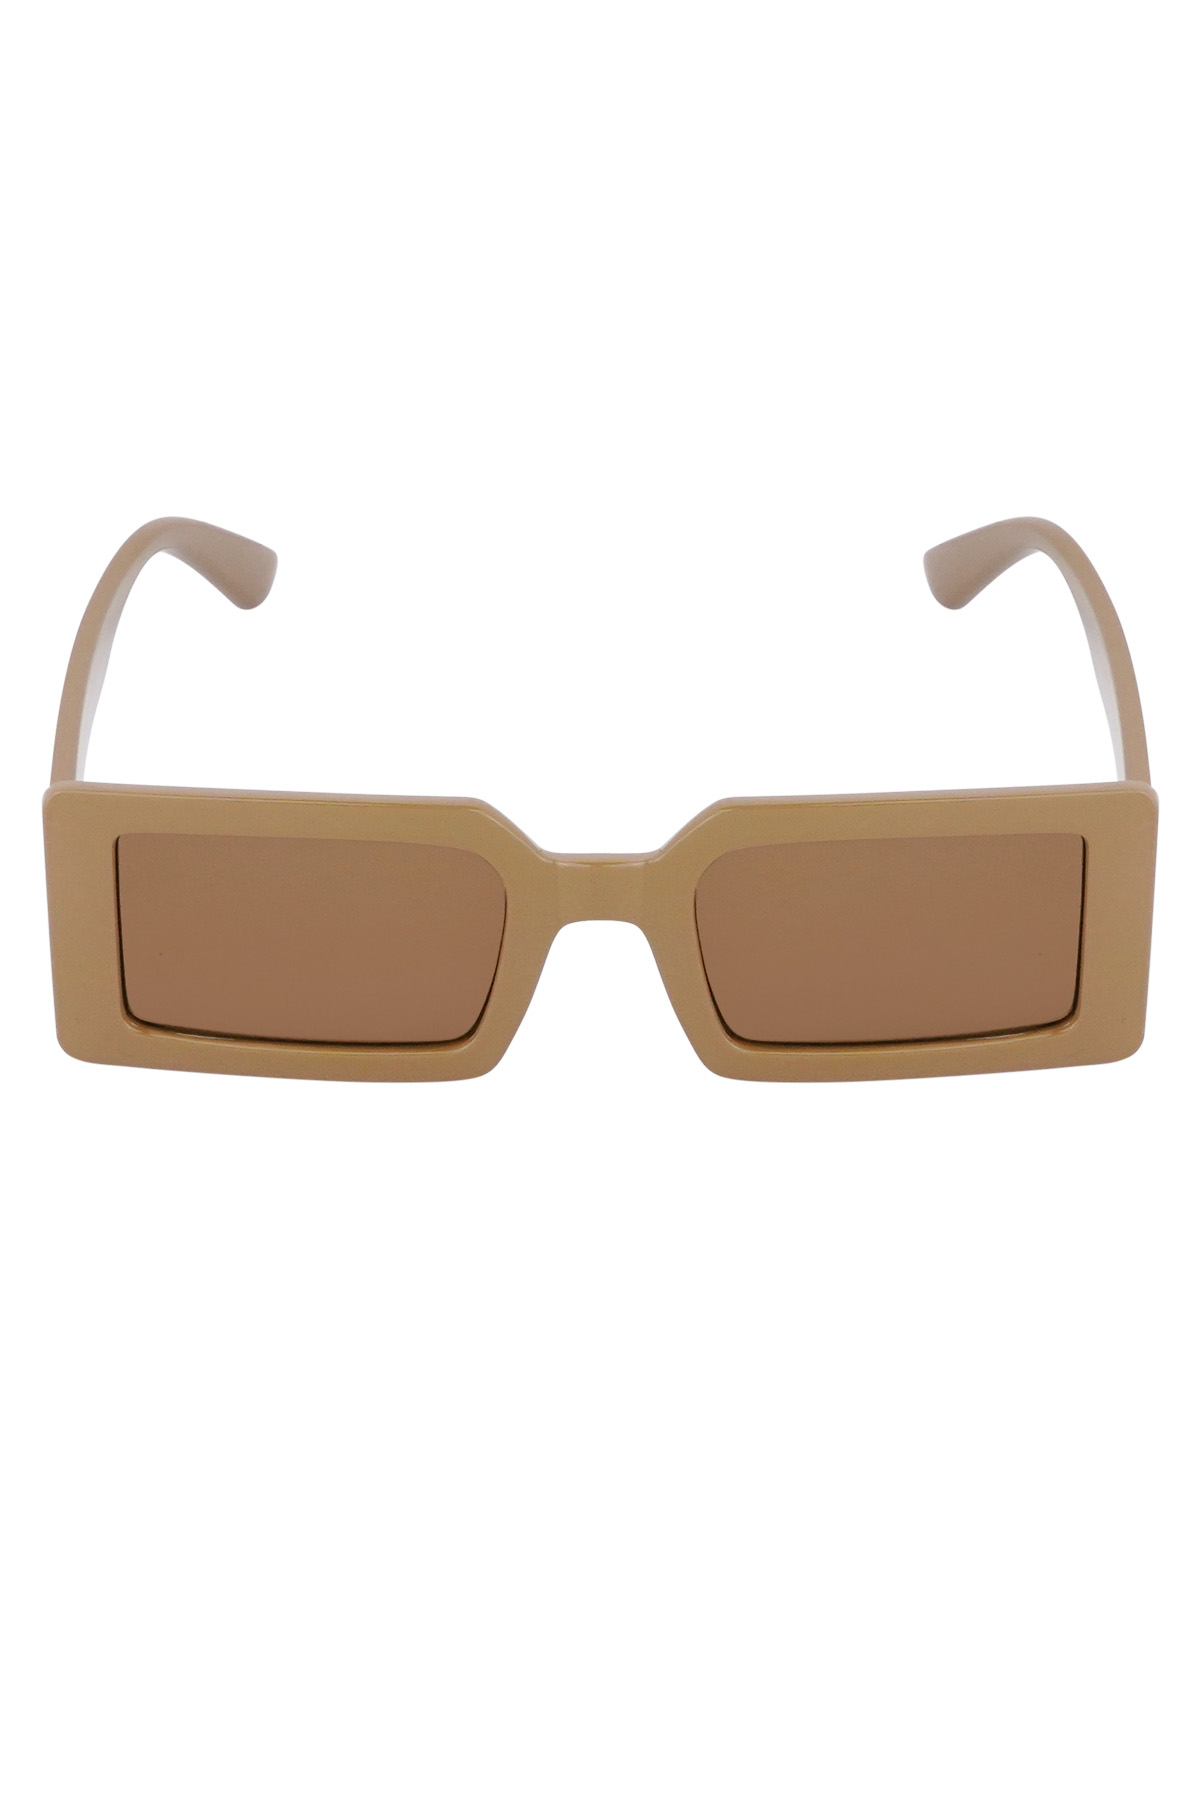 Shimmerglow sunglasses - beige Picture4